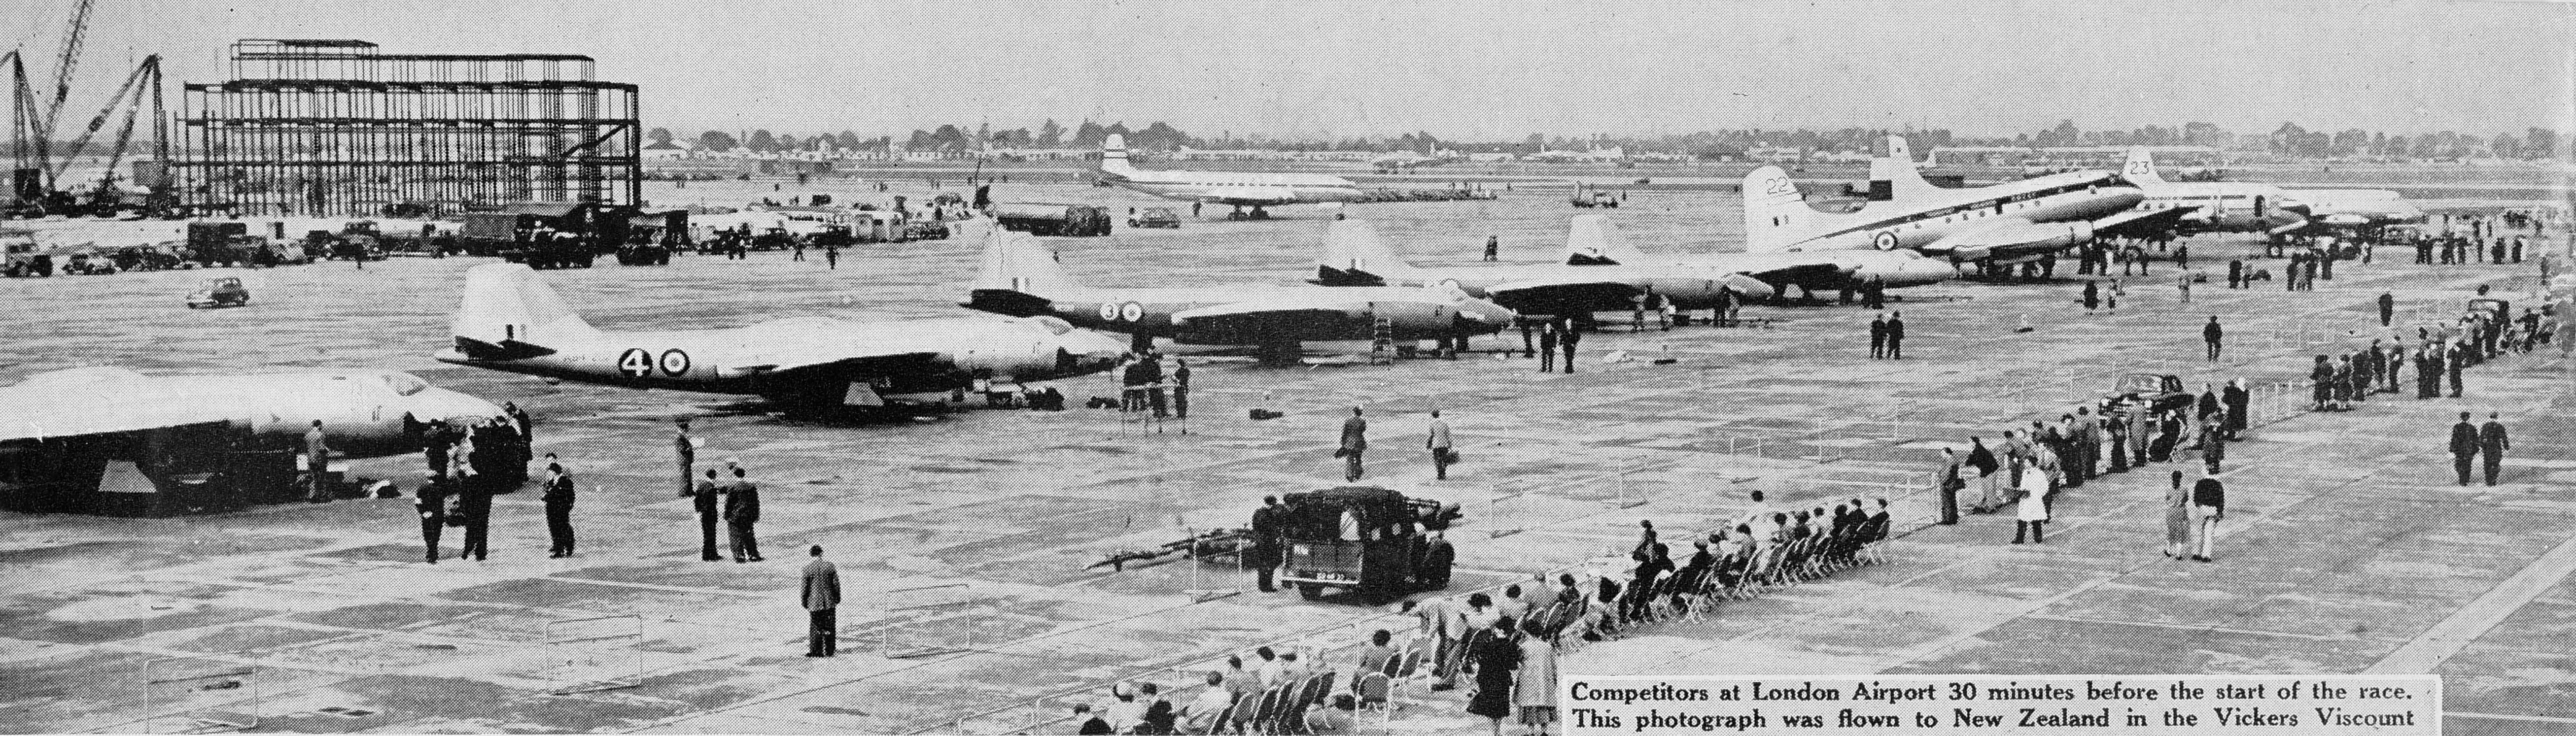 Copy of photo from page 29 from The Weekly News issue 21 October 1953. Aircraft entries in the London to Christchurch Air Race at Heathrow airport.